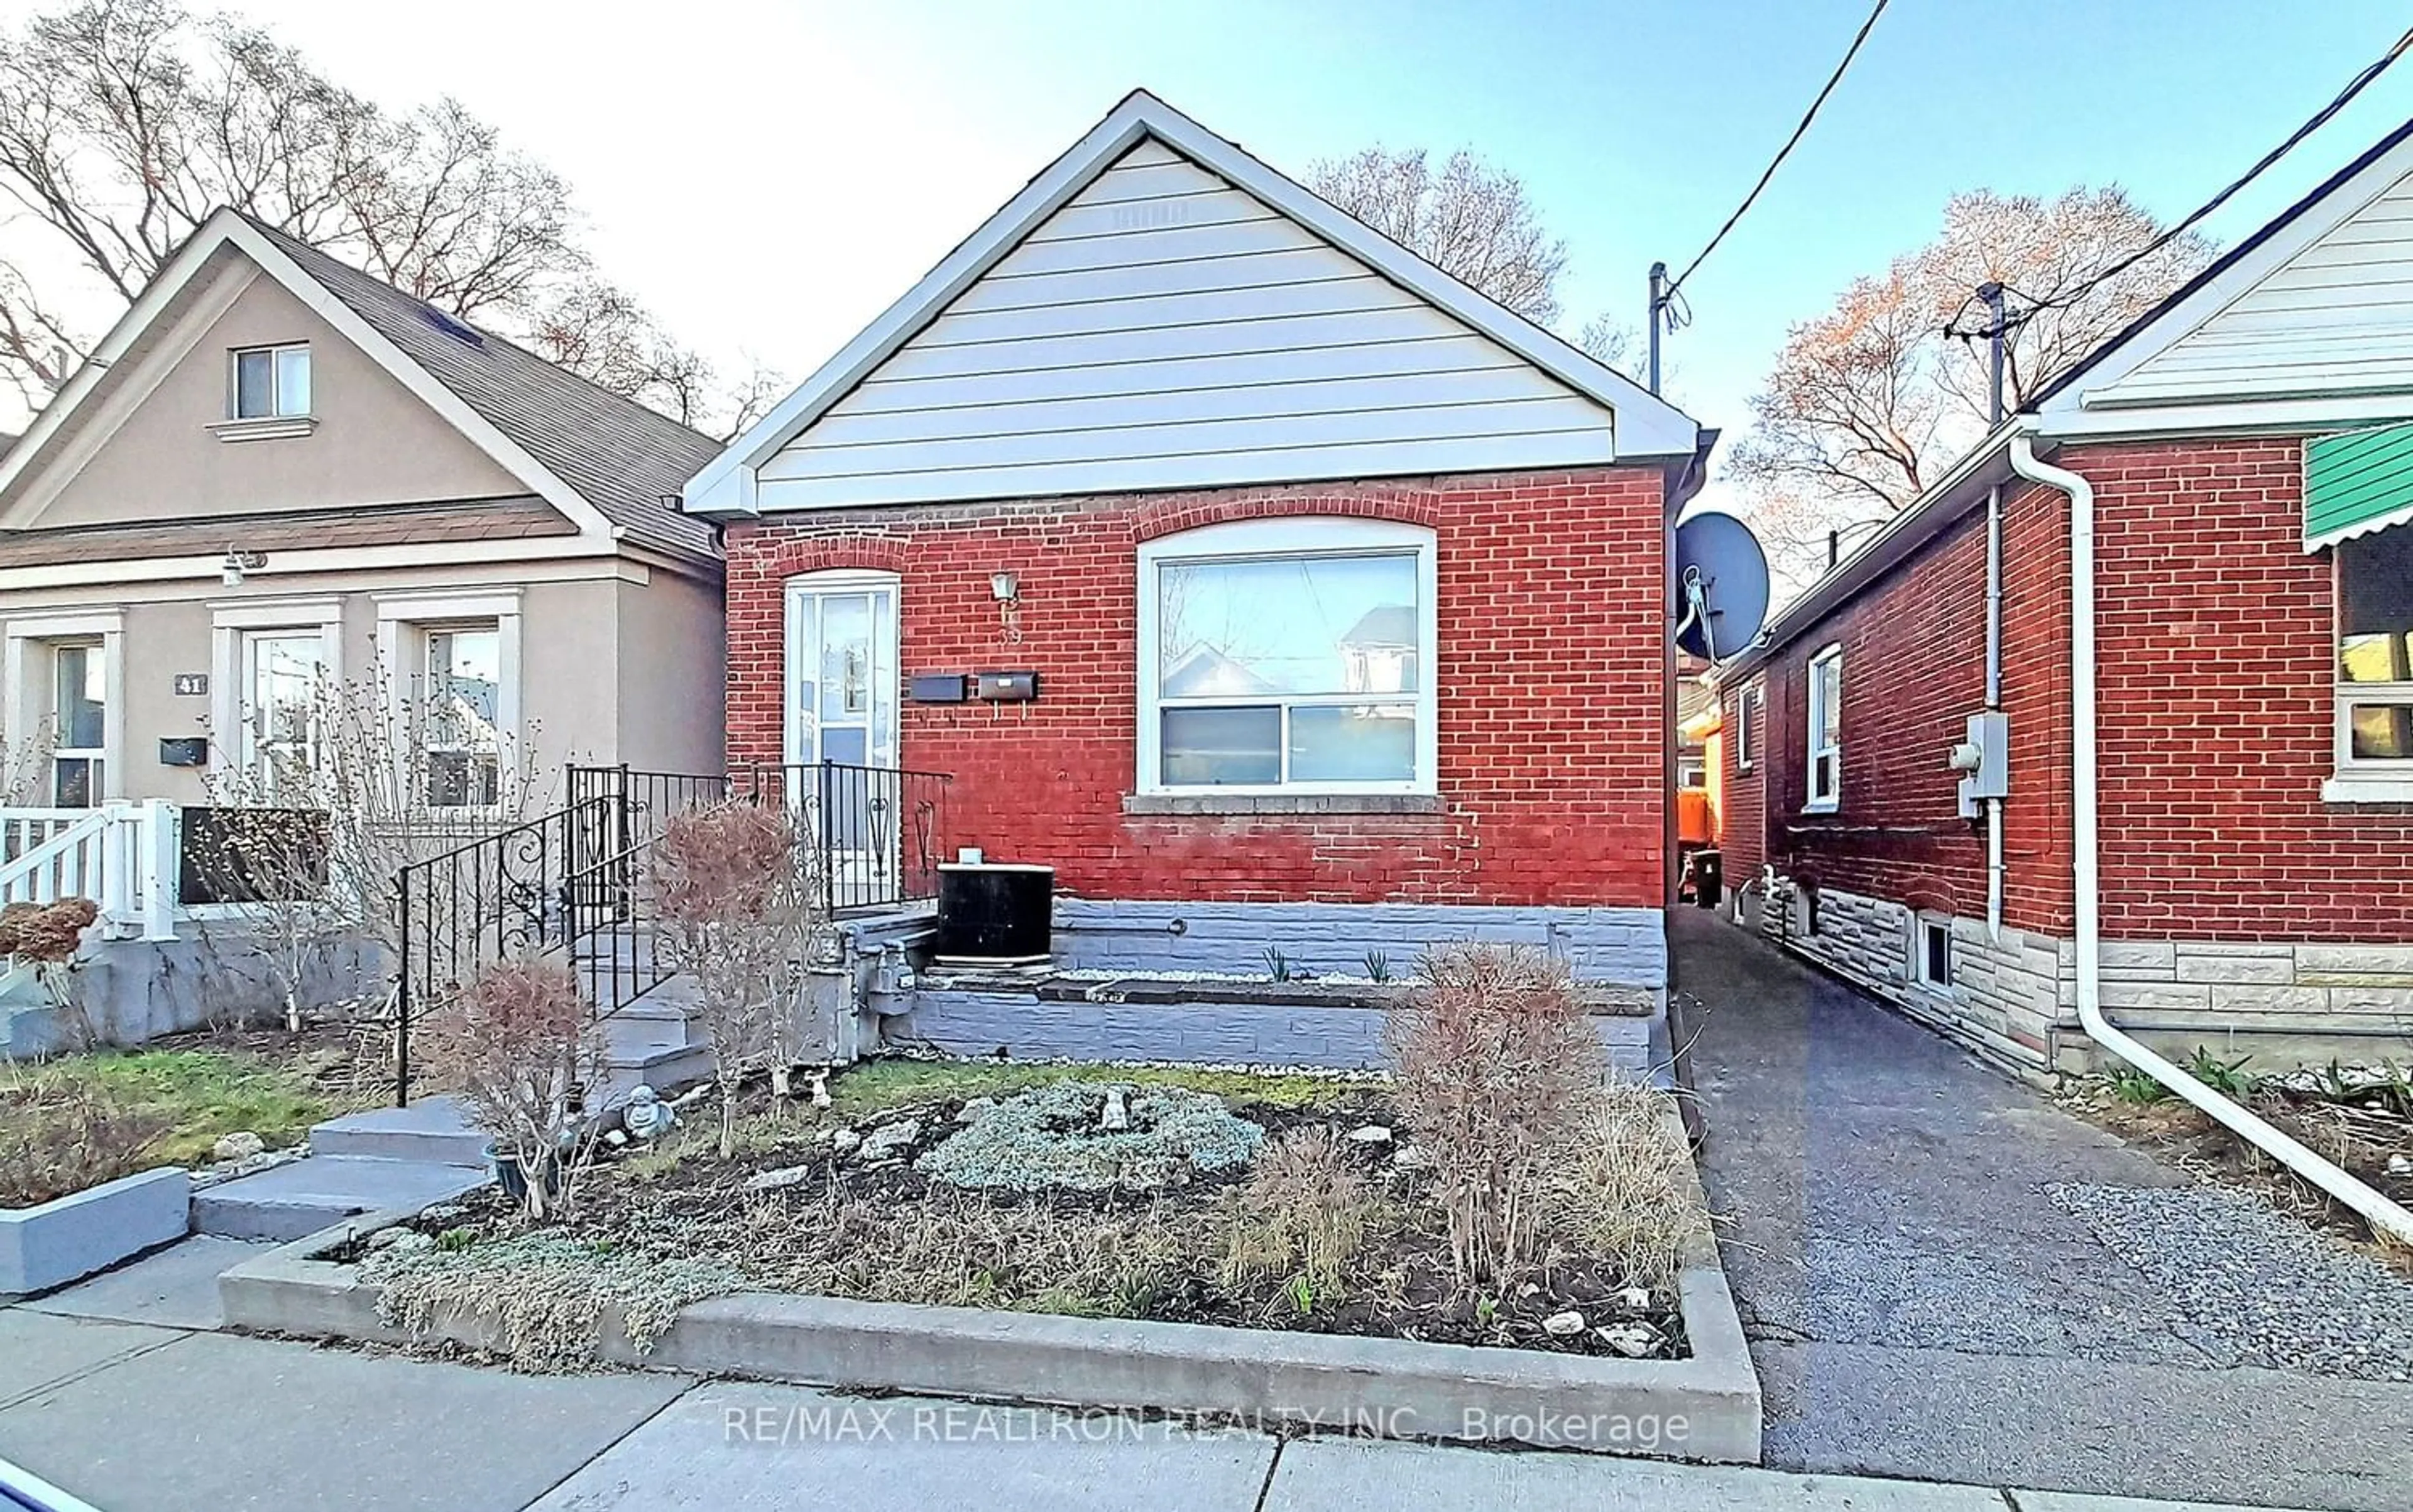 Home with brick exterior material for 39 Nickle St, Toronto Ontario M6M 2H7